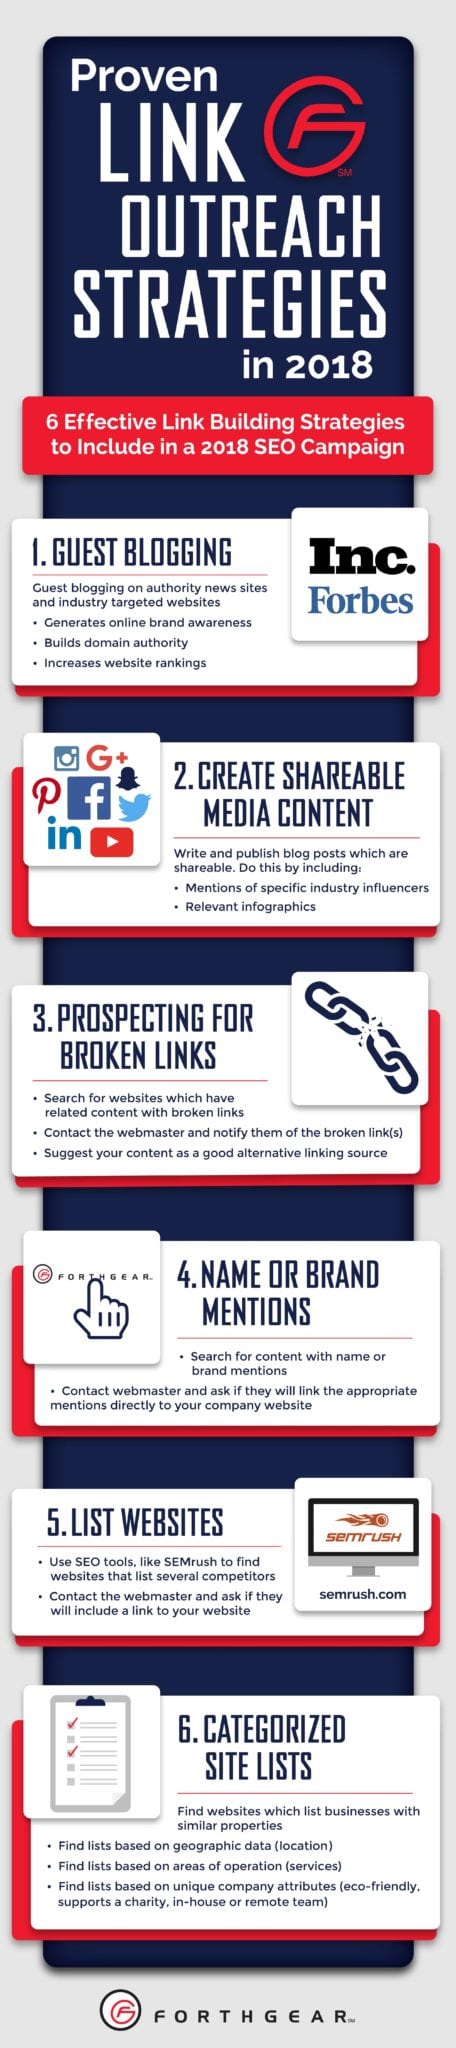 Proven Link Outreach Strategies Infographic v2-01